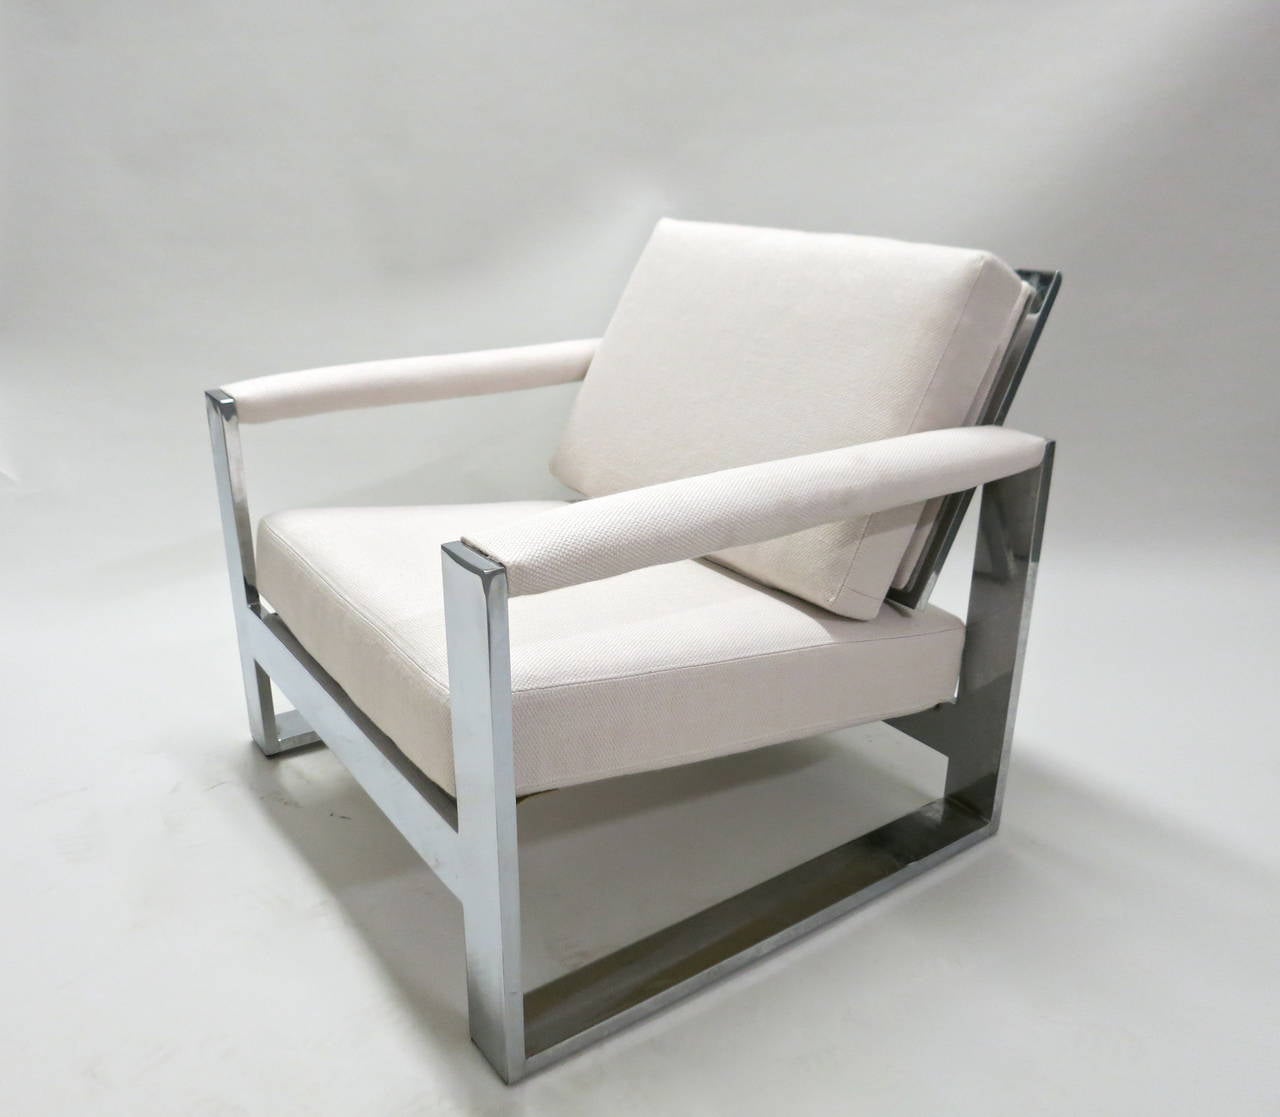 Pair of Milo Baughman designed lounge chairs that have been reupholstered in the off-white fabric shown and made of three inch wide, flat-bar, polished chromed steel frames. These are strong and sturdy produced in the 1970s. 